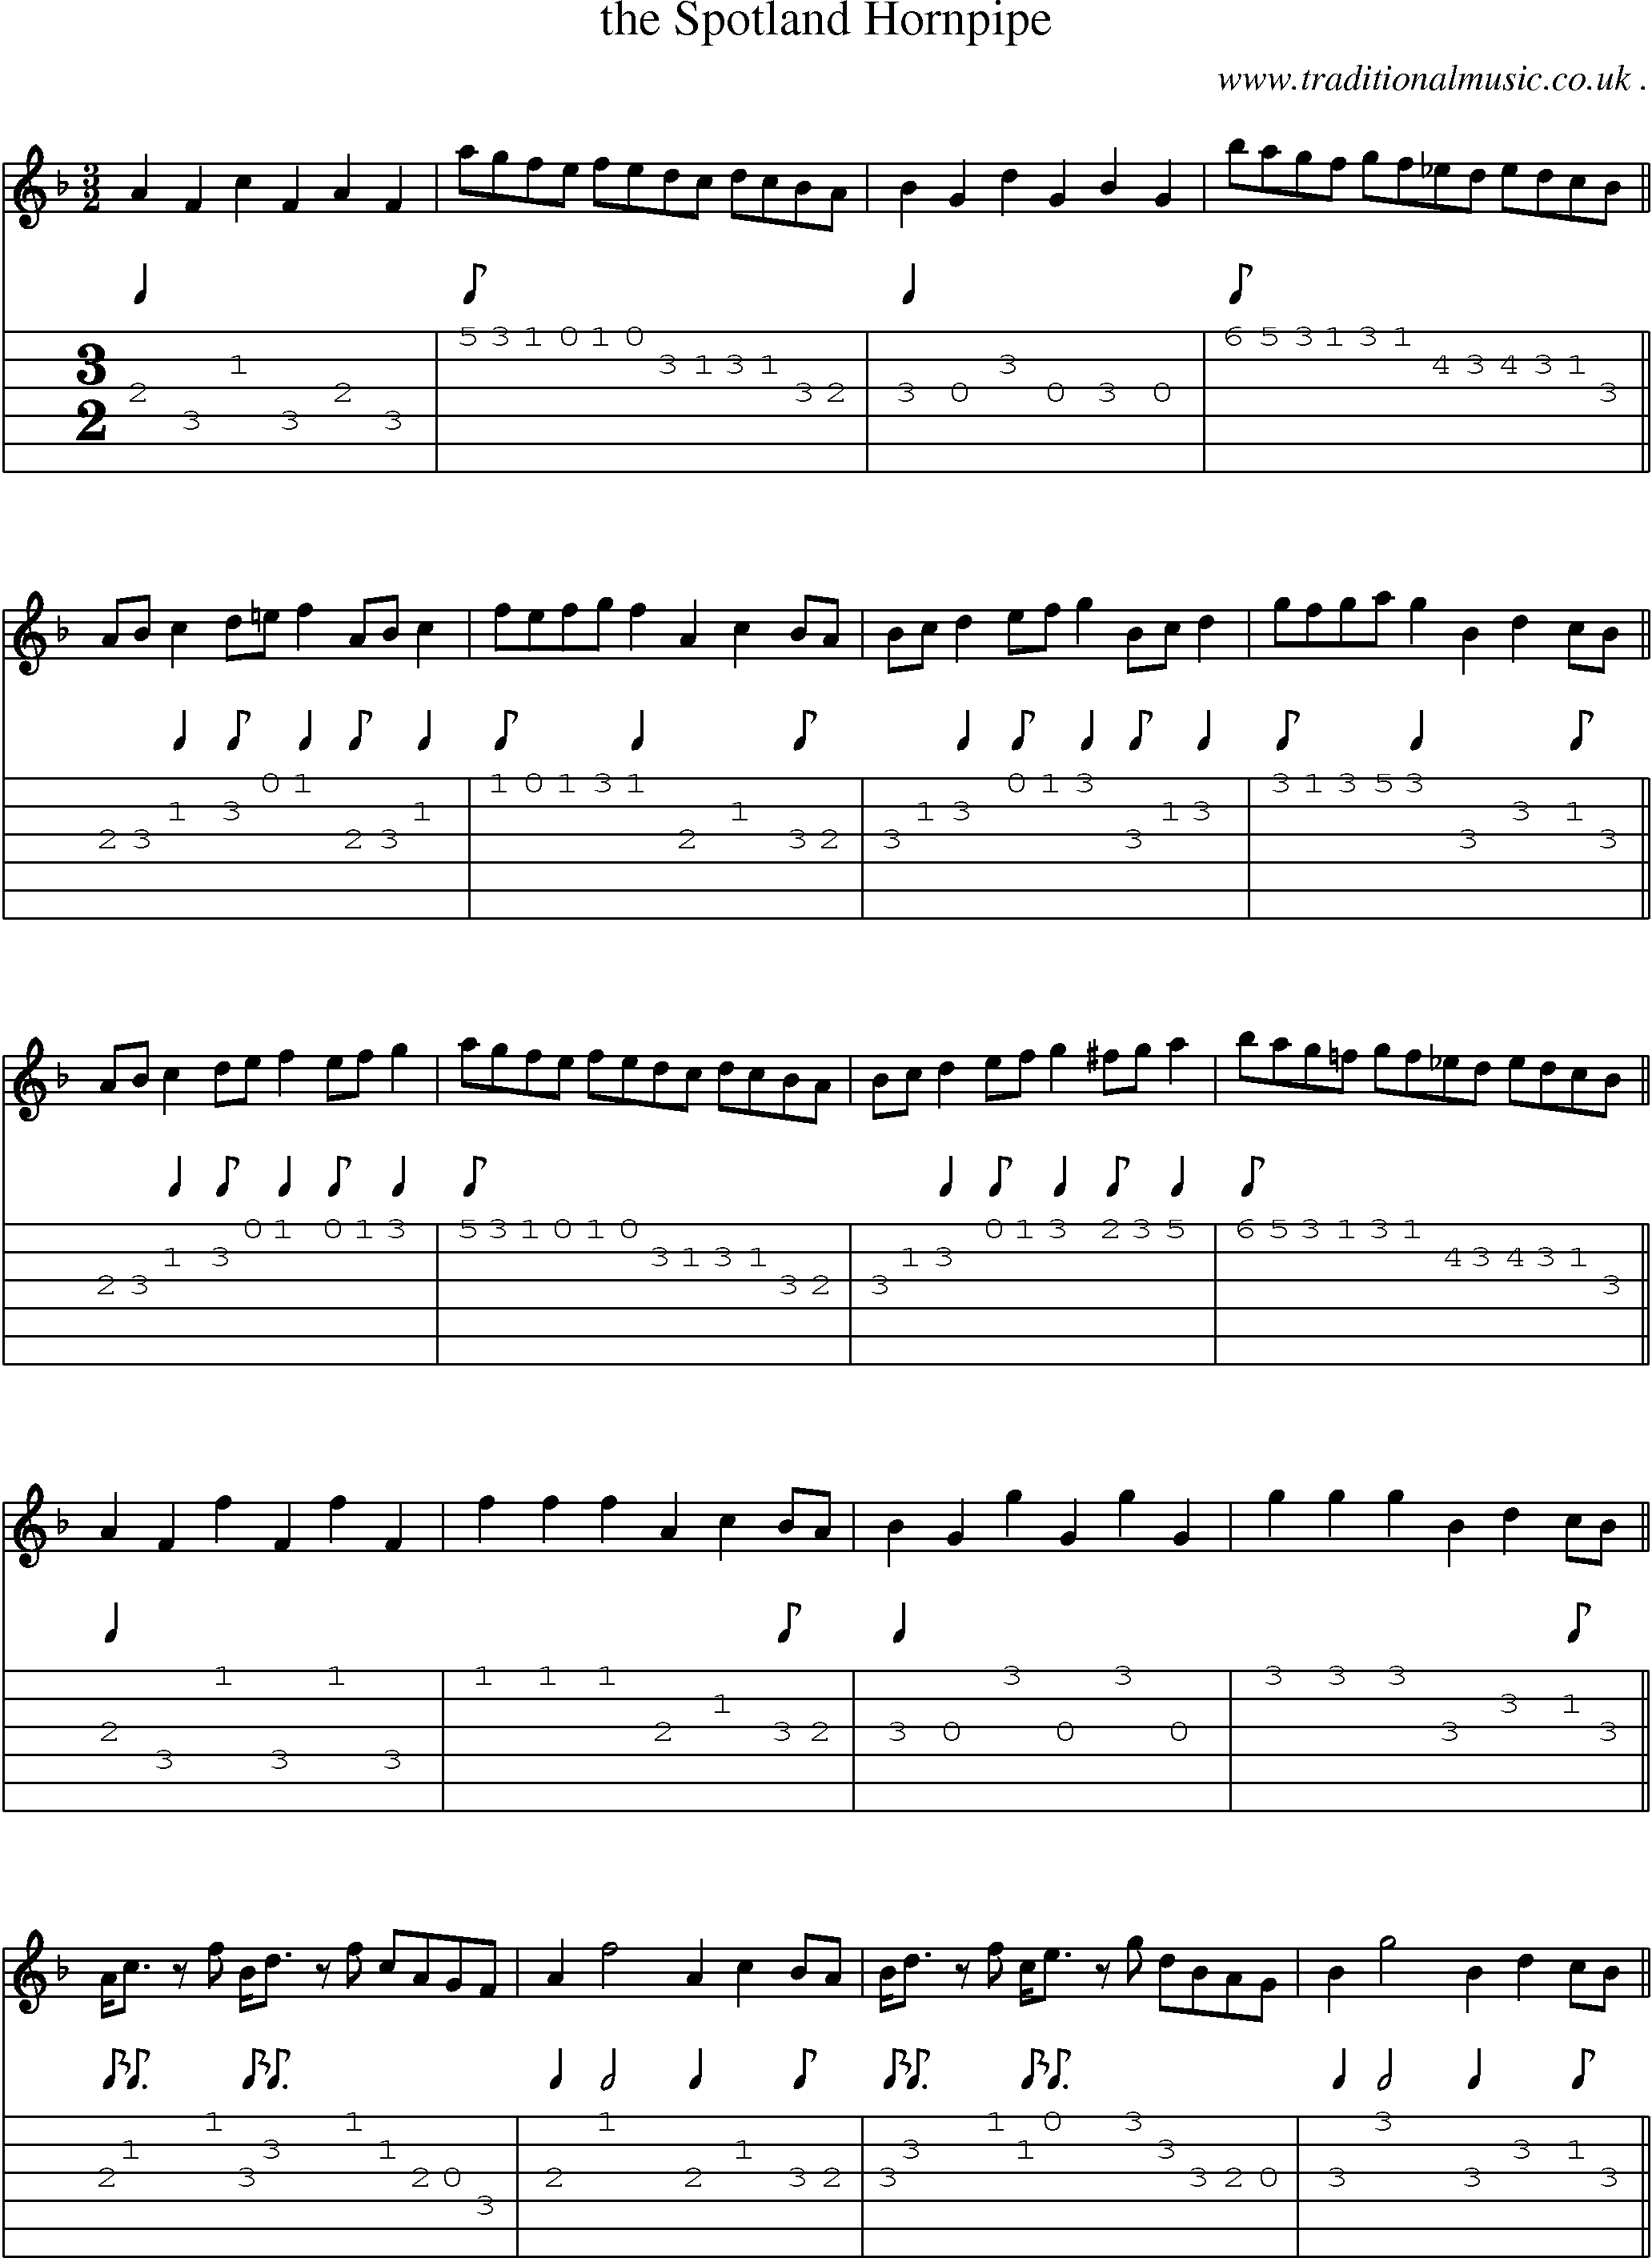 Sheet-Music and Guitar Tabs for The Spotland Hornpipe